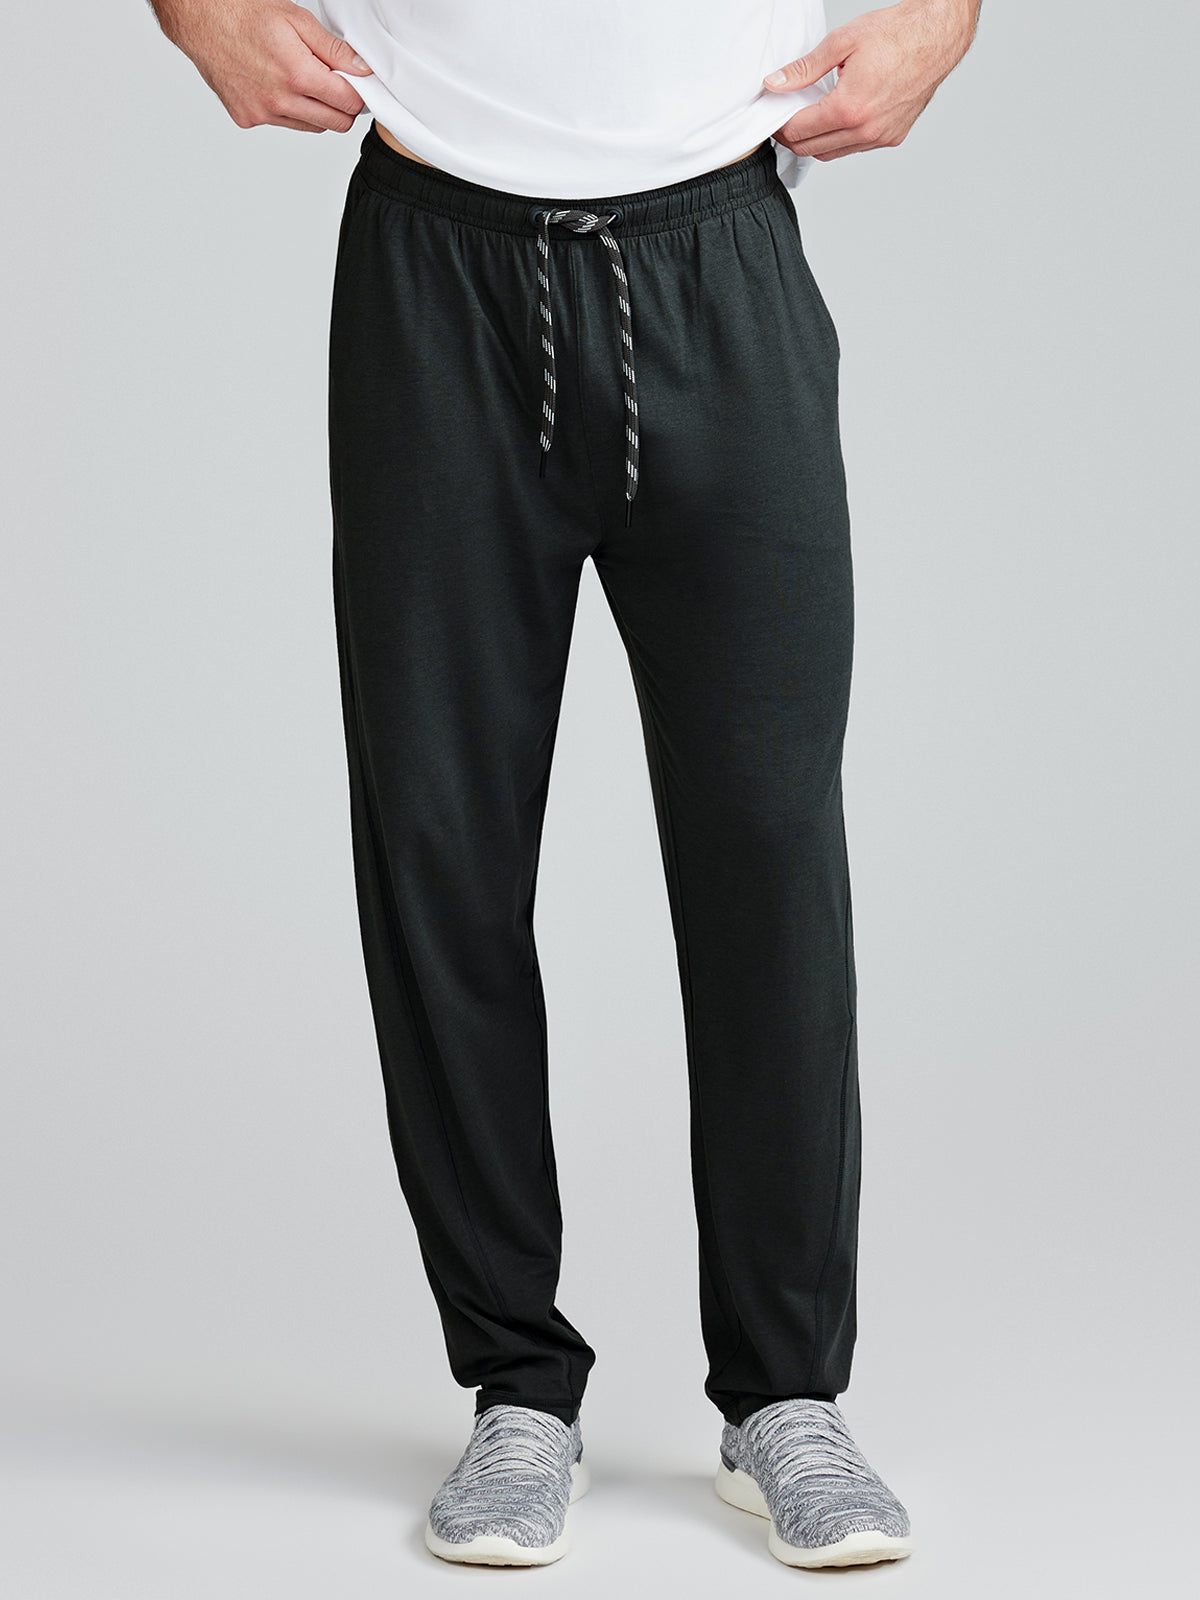 Carrolton Pant by Tasc Performance